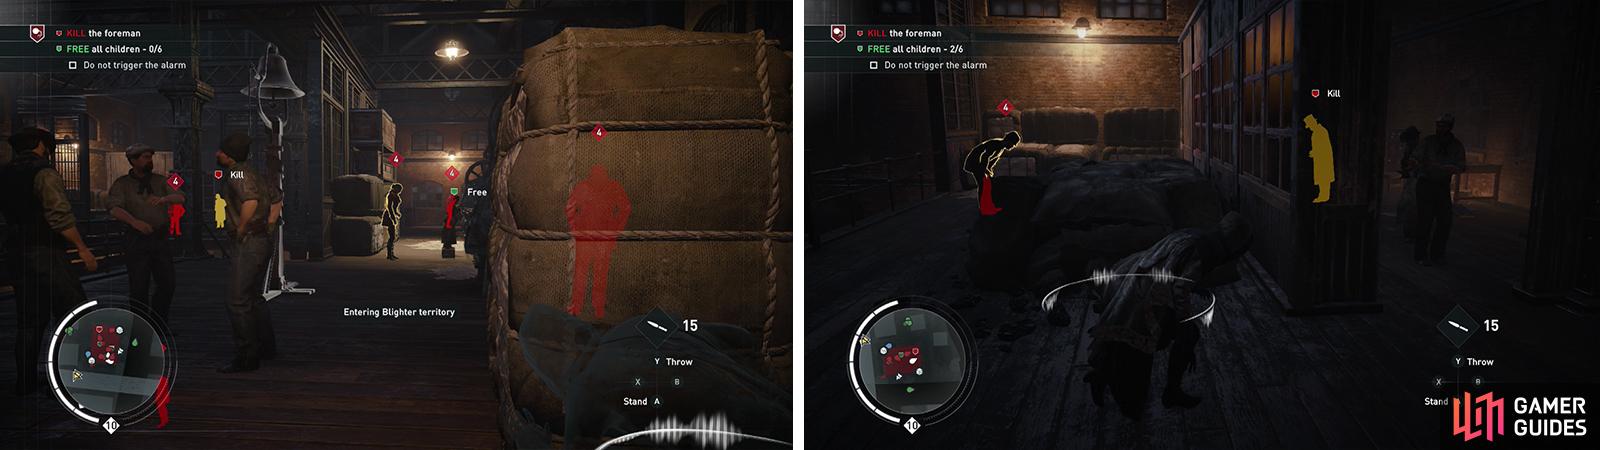 Disabling the alarm bell will make things easier (left). Afterwards kill the foreman (right).